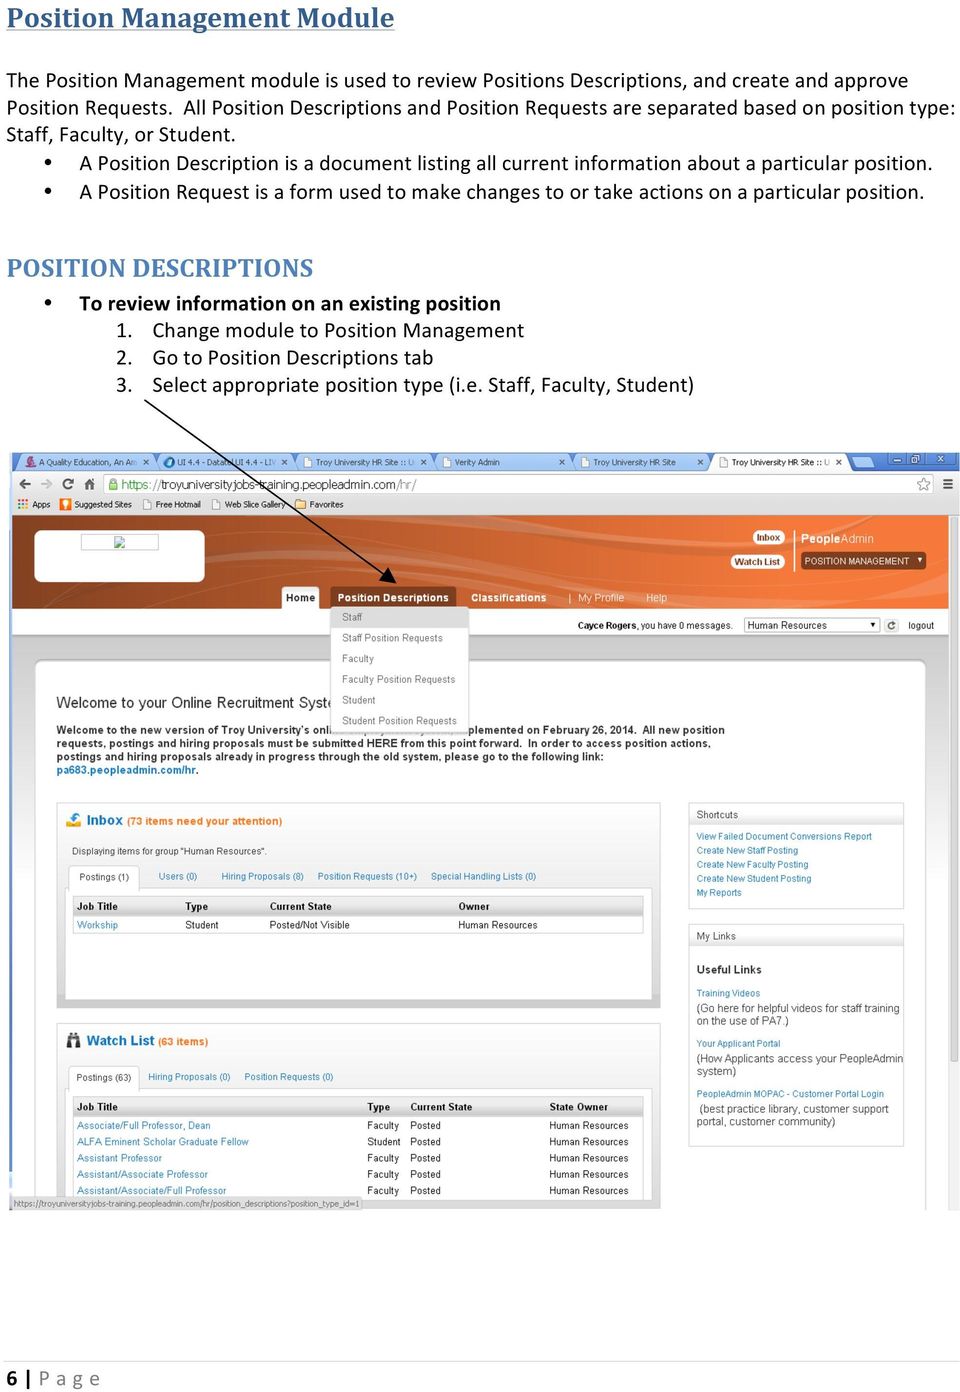 A Position Description is a document listing all current information about a particular position.